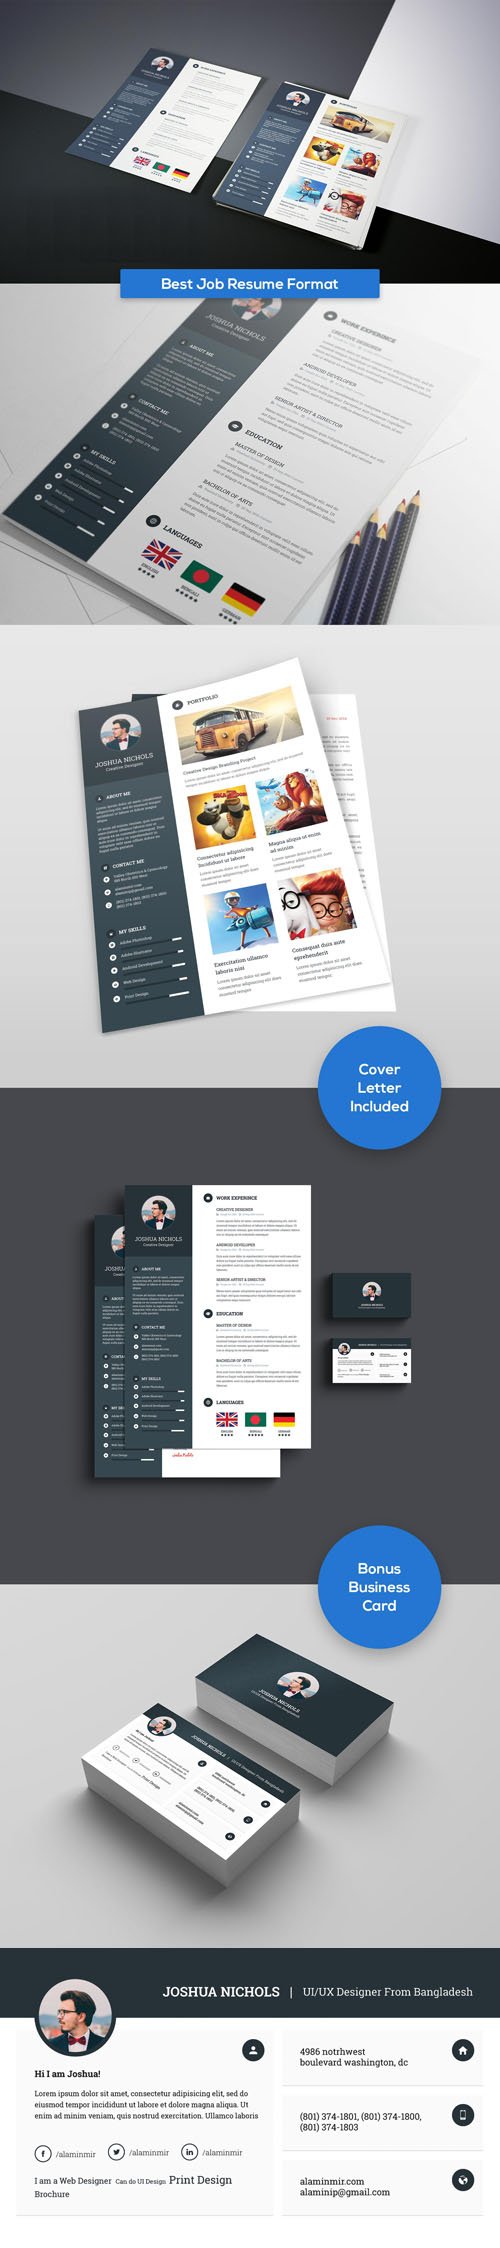 Best Job Resume Format PSD Templates with Business Card